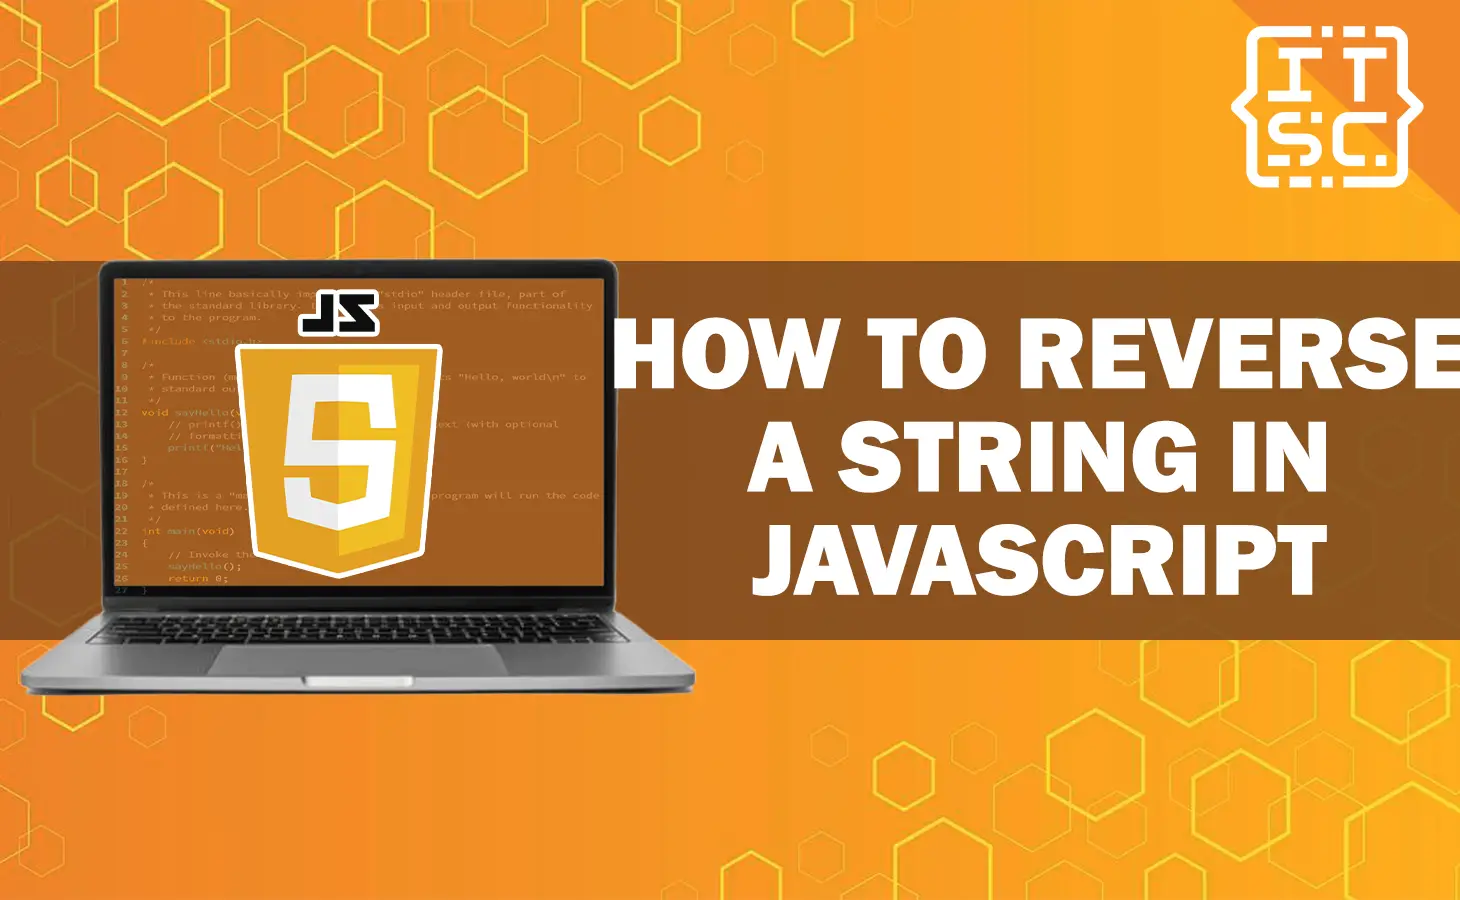 How to Reverse a String in JavaScript